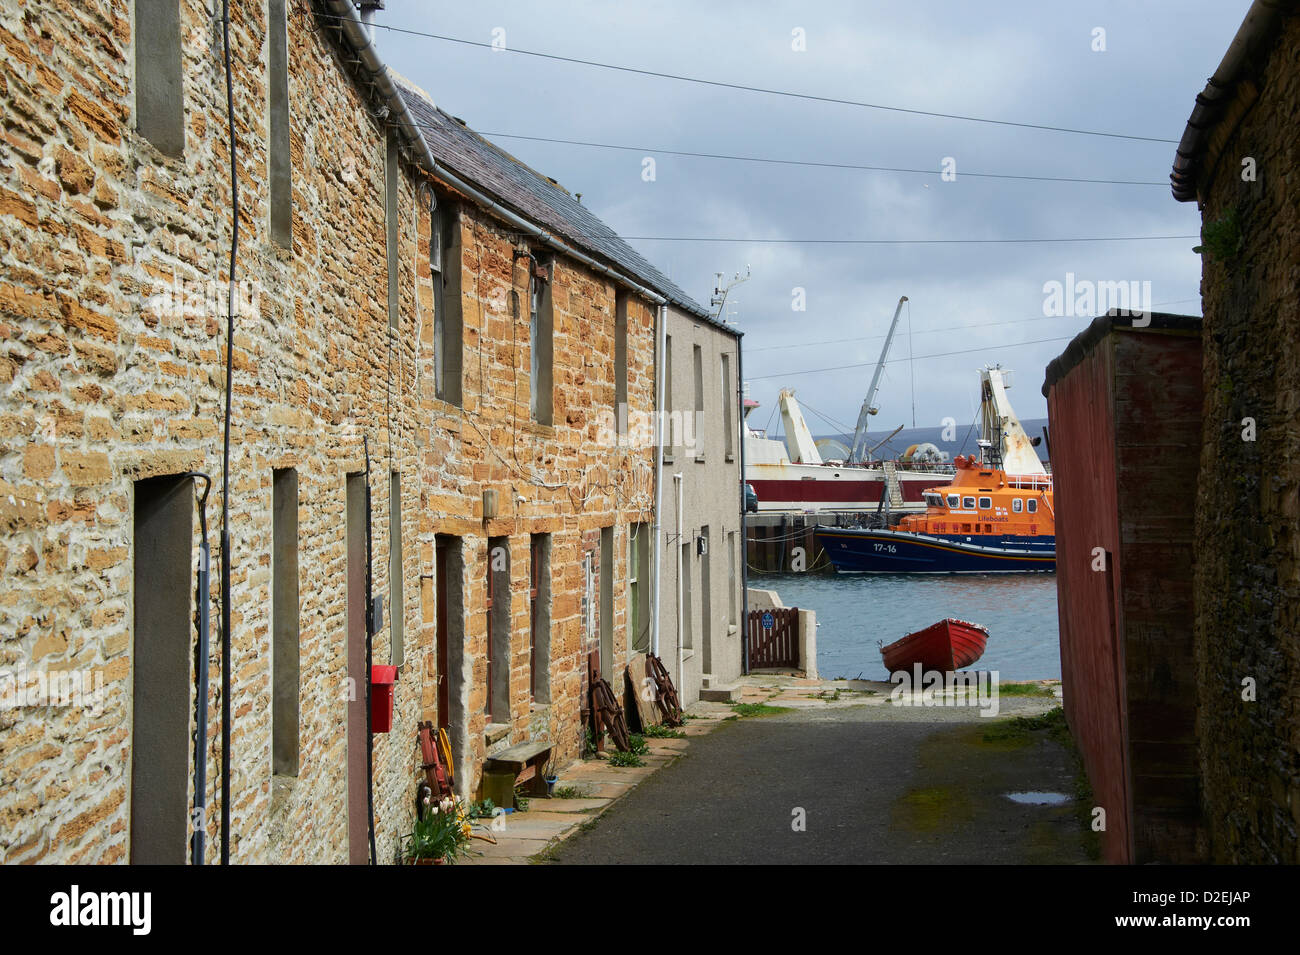 Stromness, Orkney, Northern Scotland. One of the many alleyways from the old main street leading down to the harbourside. Stock Photo